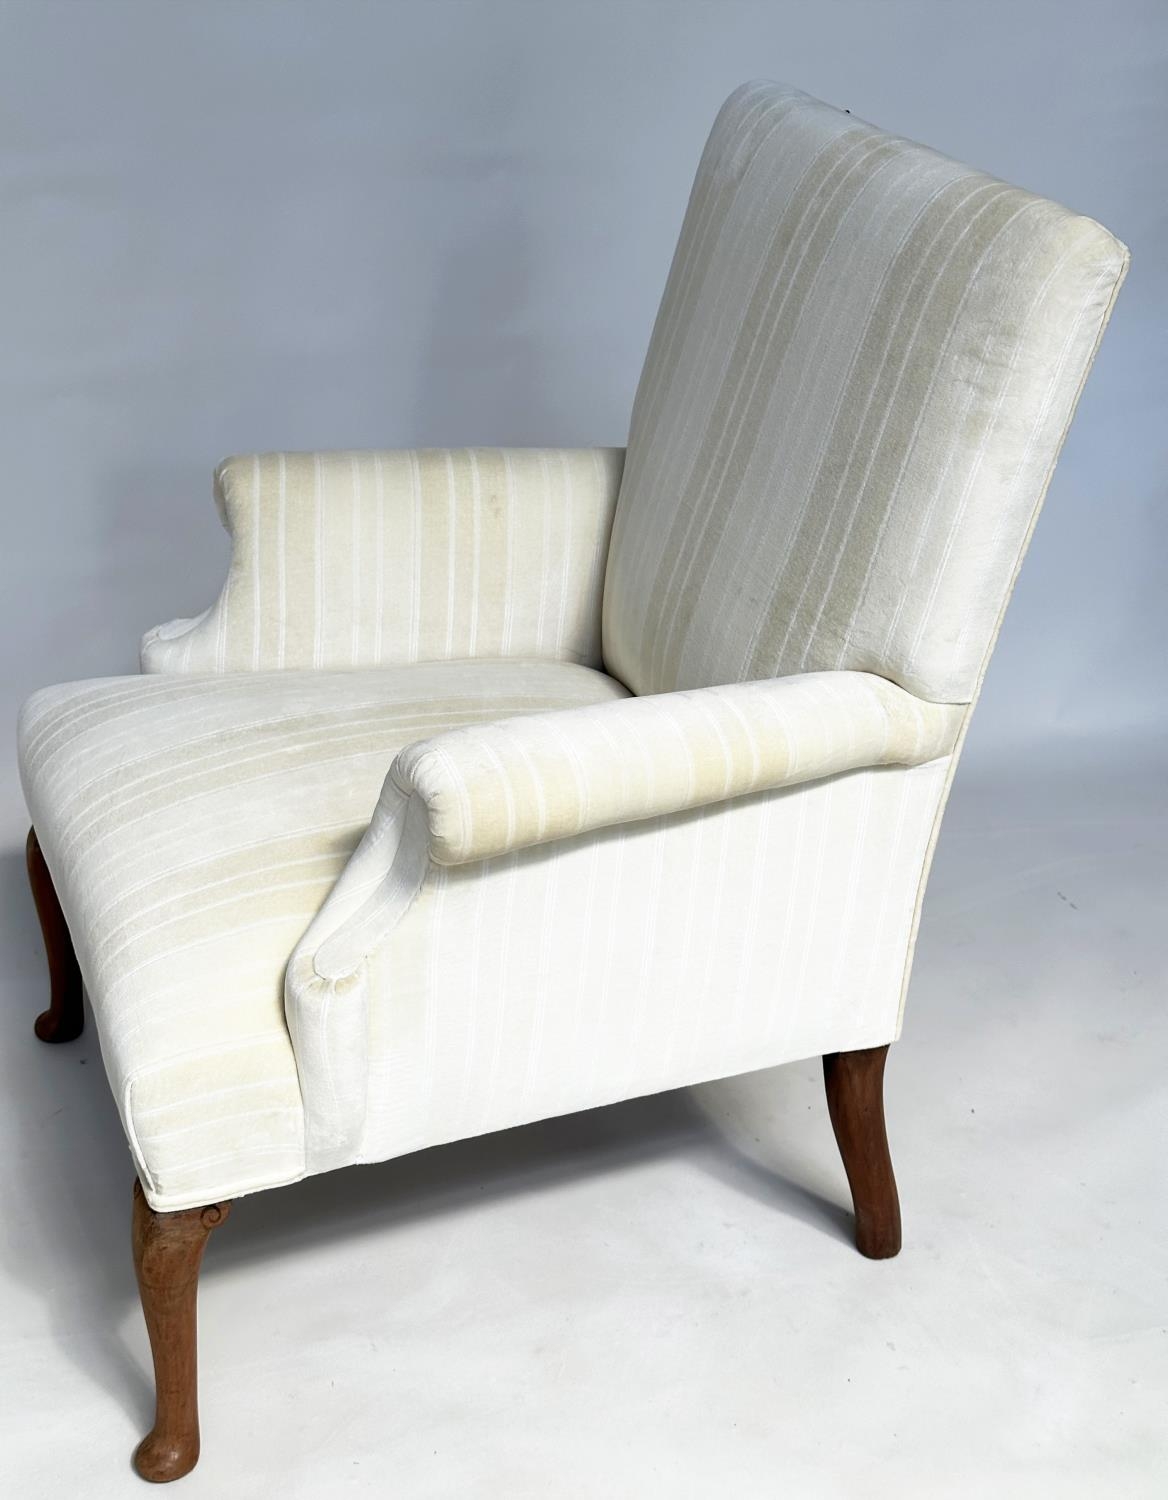 SCROLL ARMCHAIR, Edwardian style recently reupholstered, in neutral woven strip cotton with shaped - Image 3 of 5